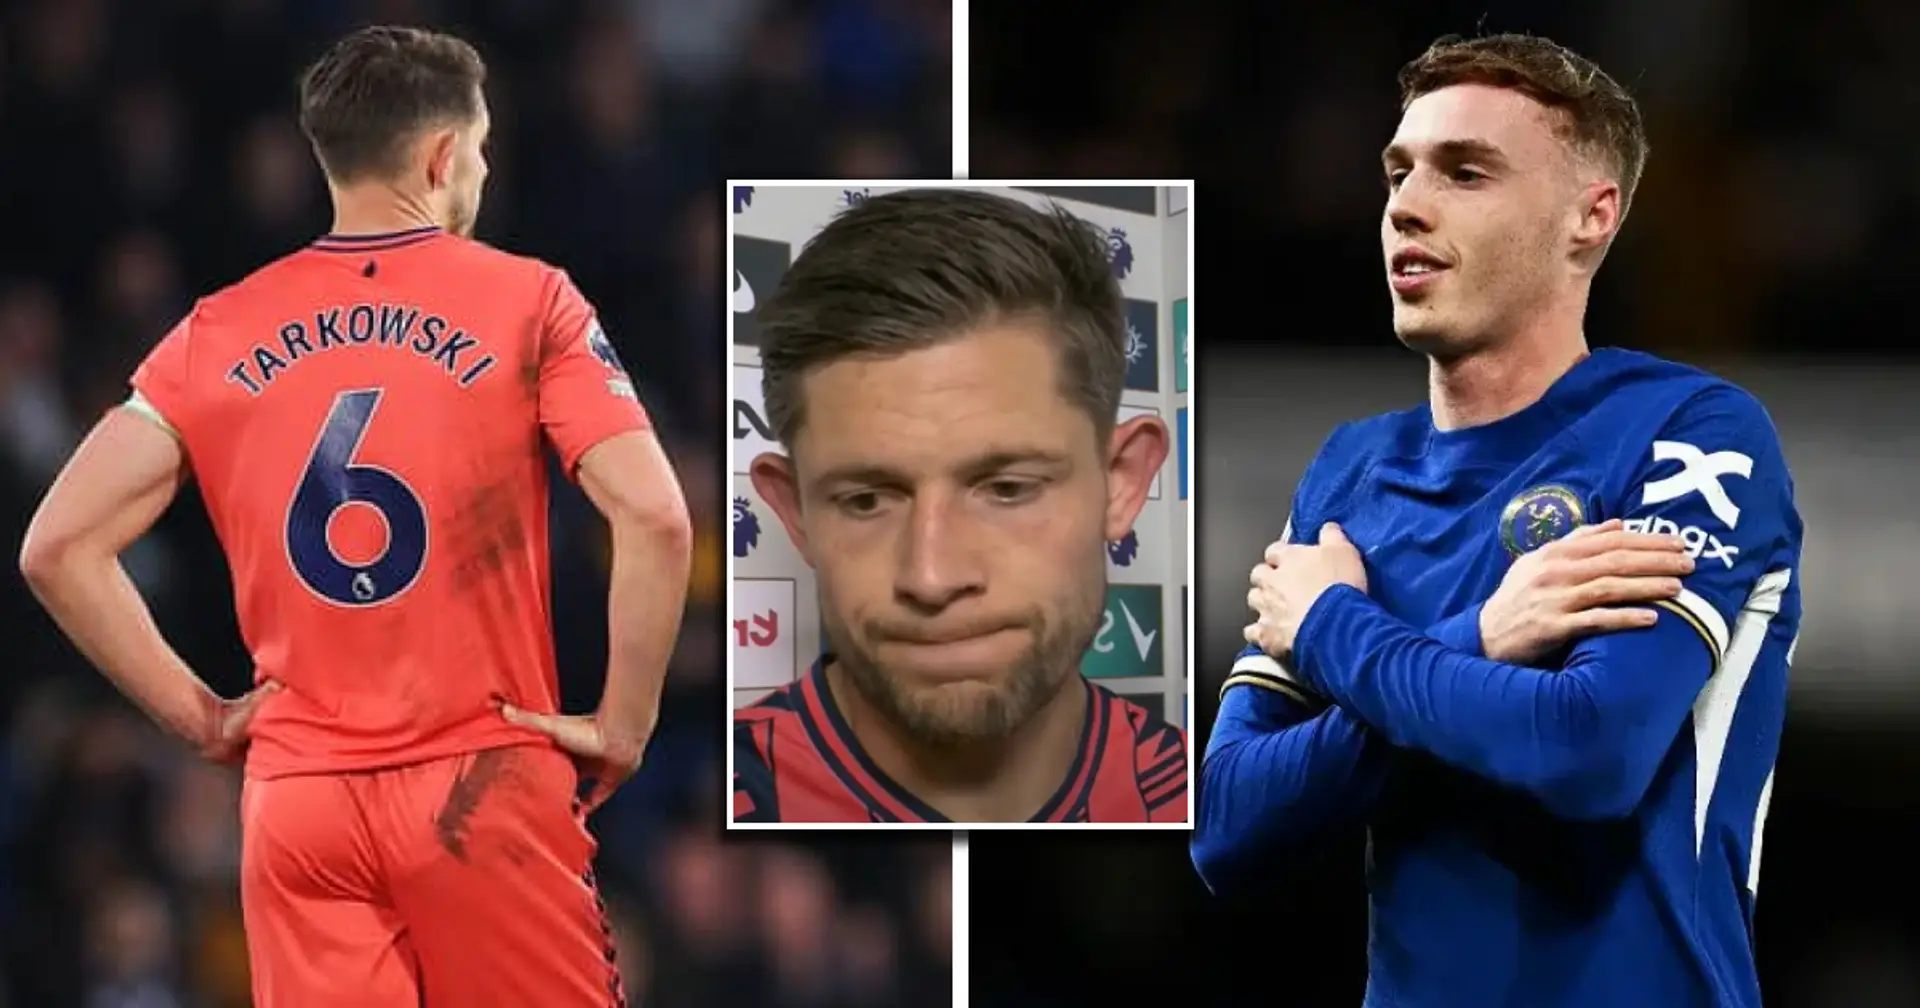  'The most embarrassed I have felt as an individual': James Tarkowski apologizes to fans after Chelsea trashing 